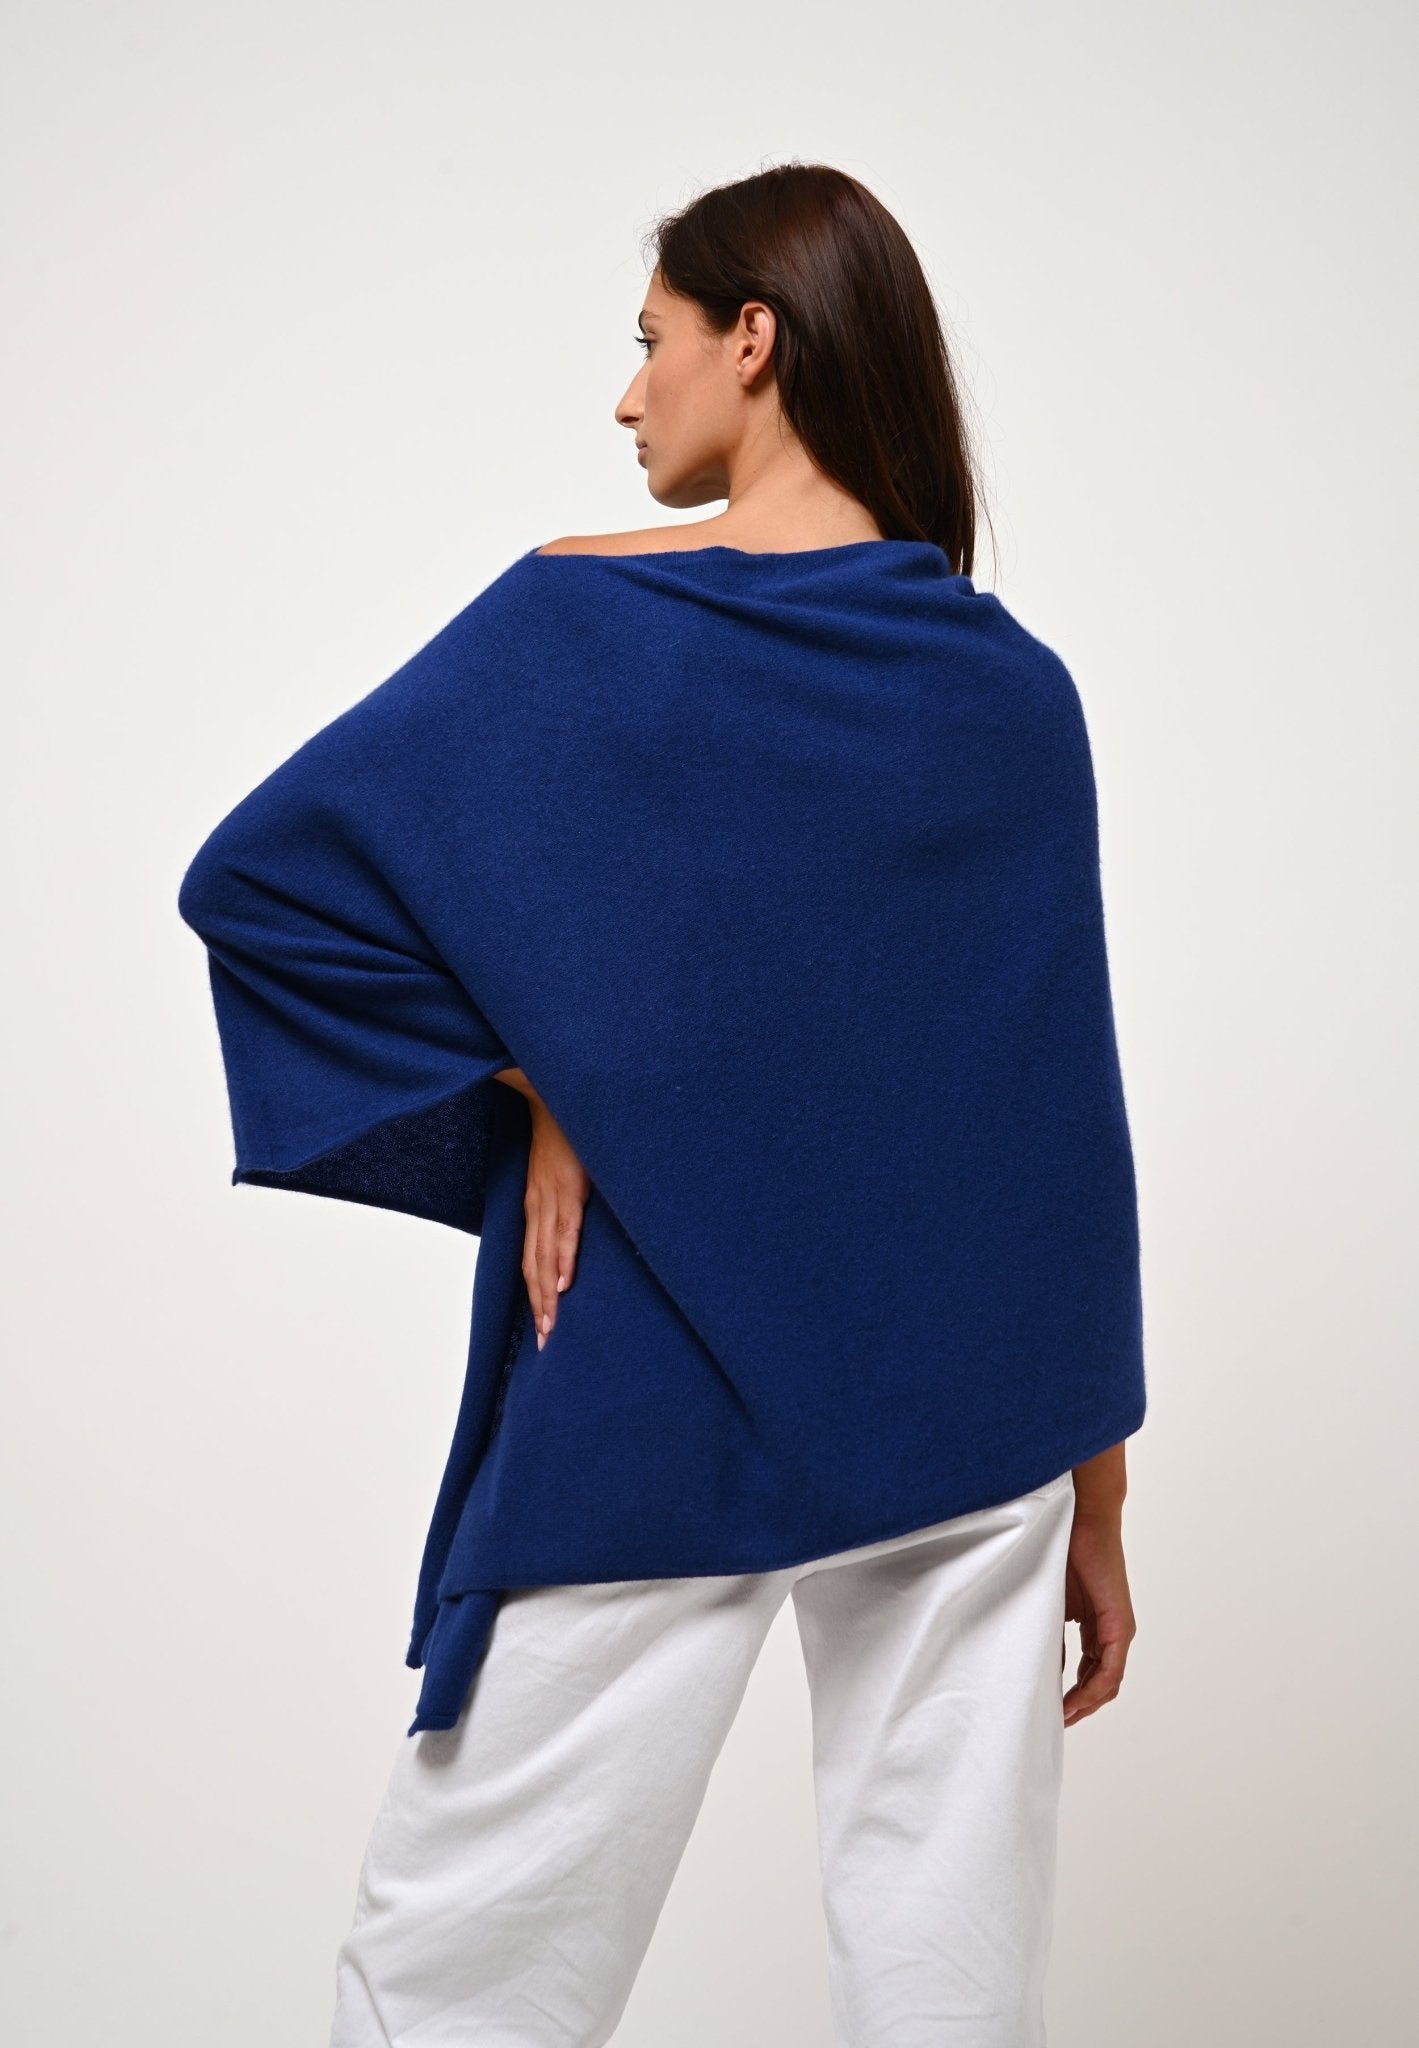 CARRA poncho outremer 100% cachemire